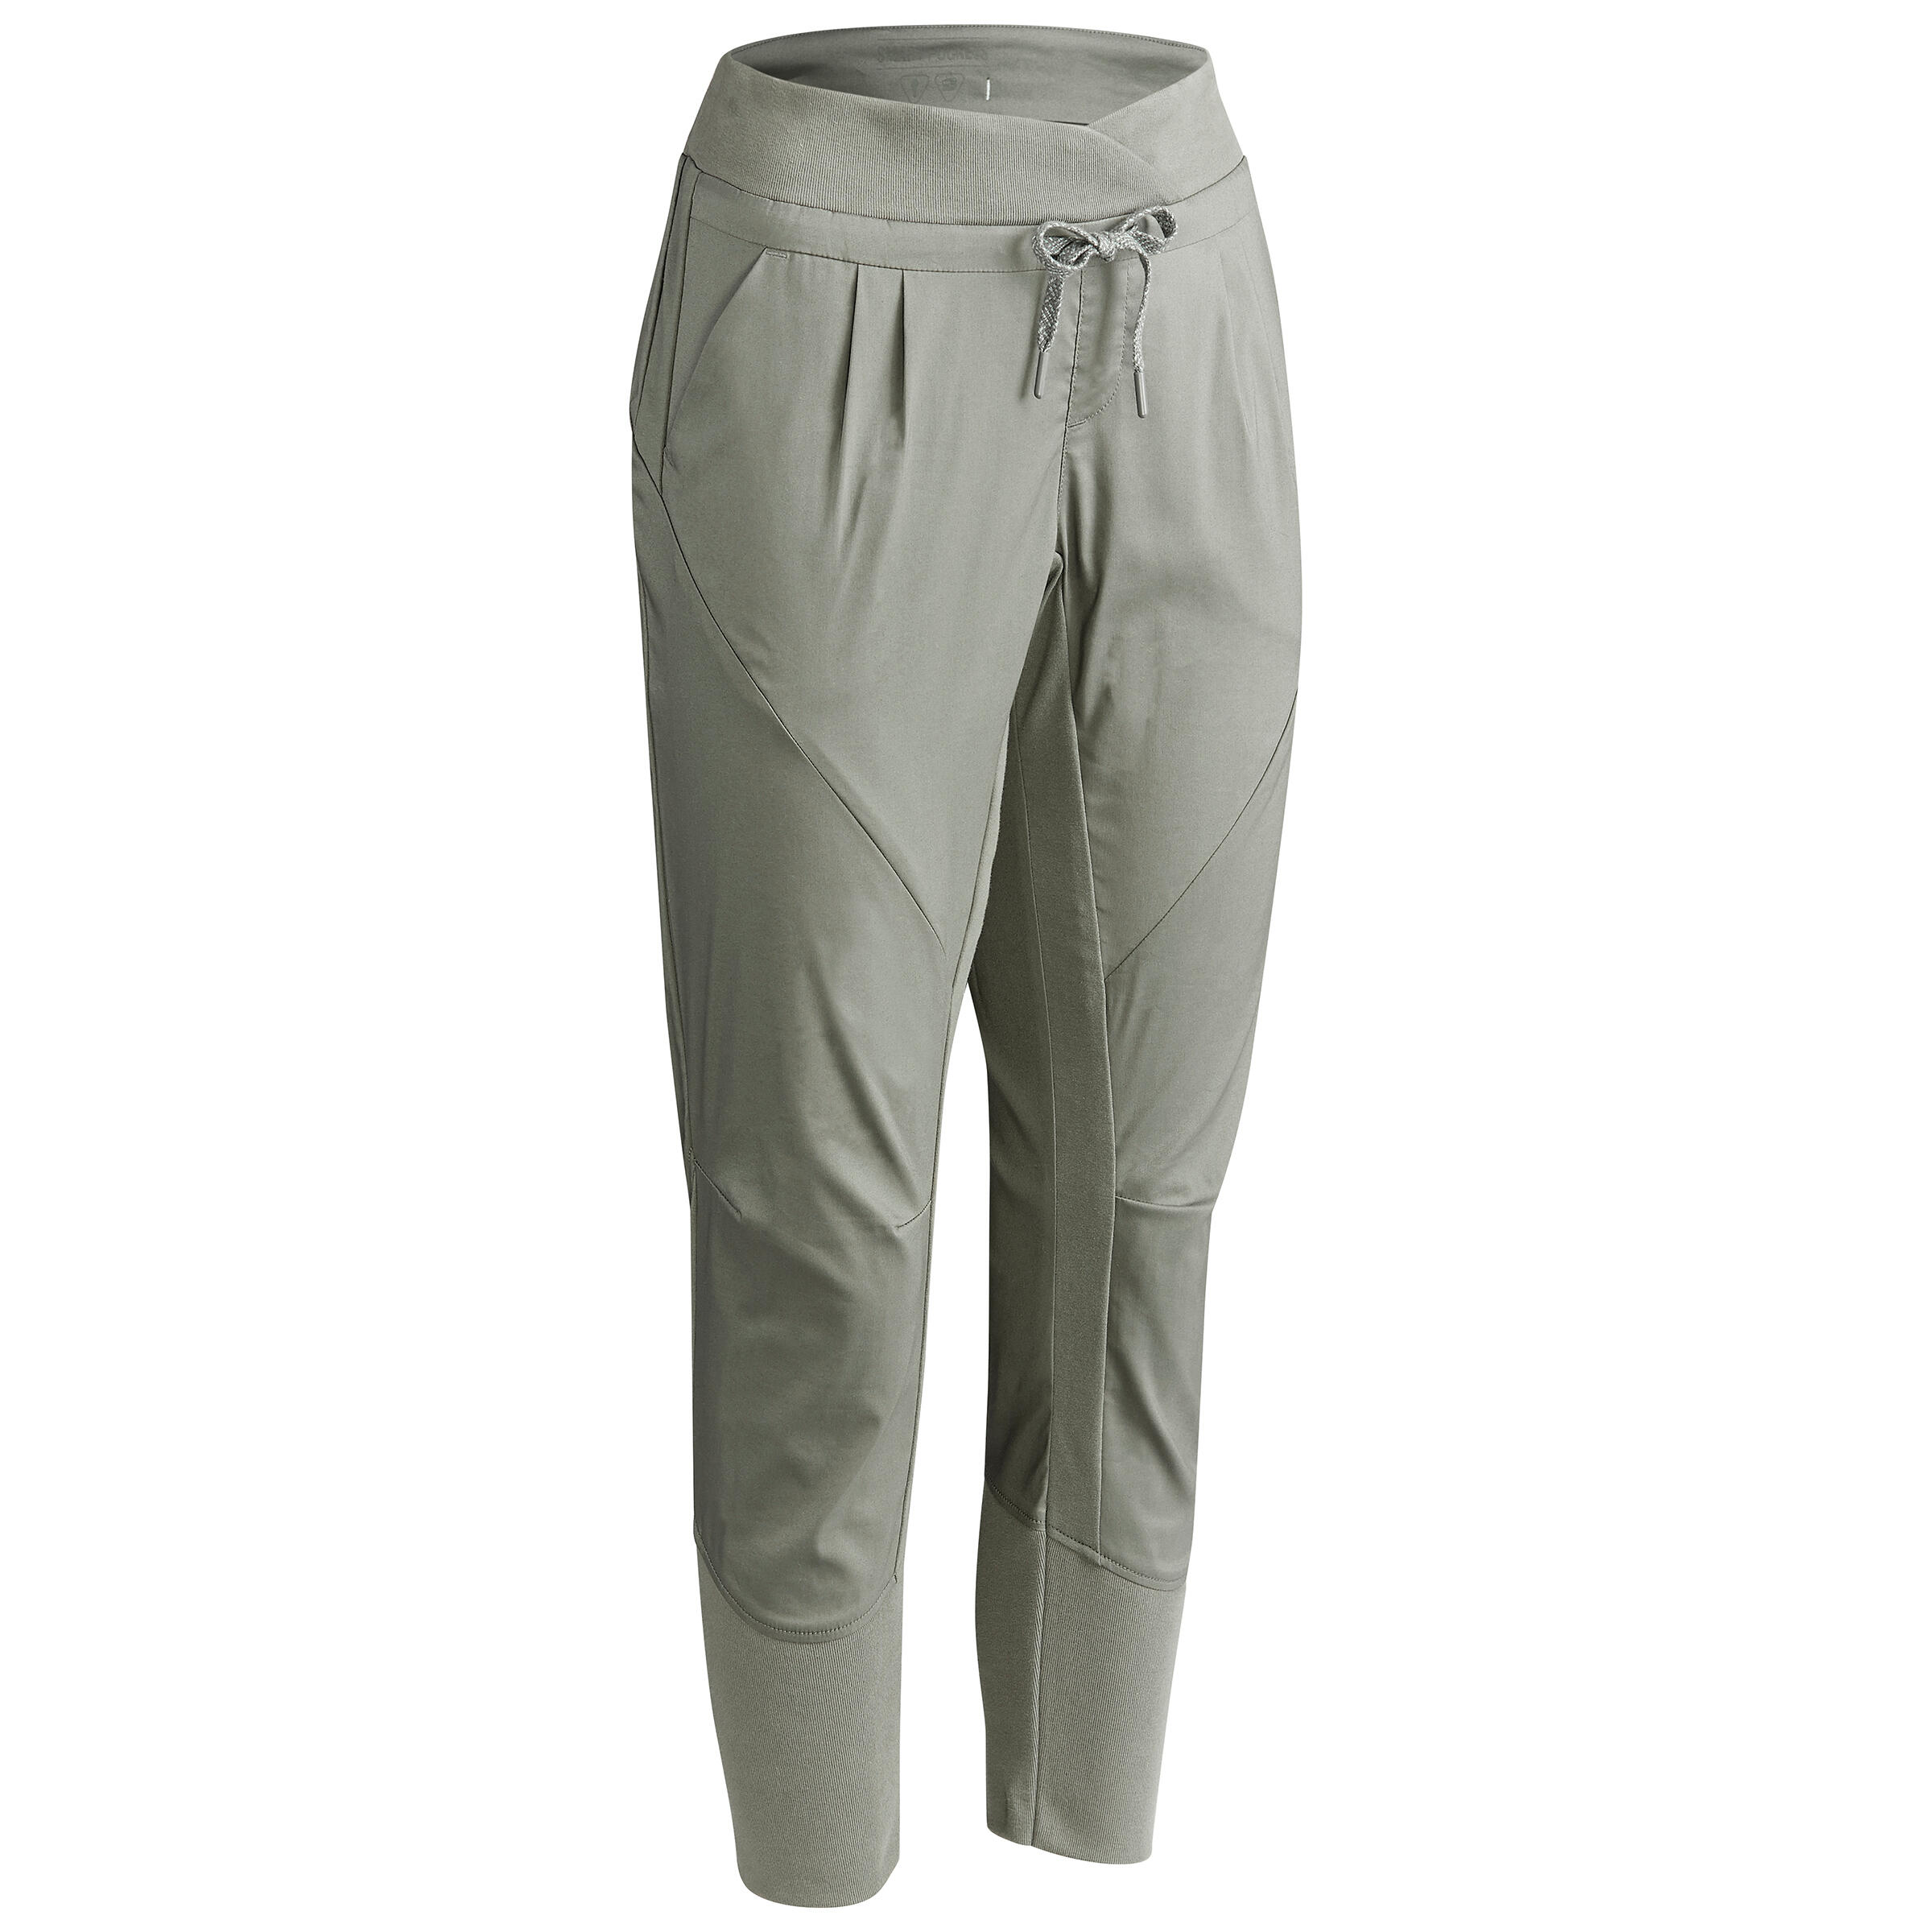 Women's High-rise Wide Leg French Terry Sweatpants - Wild Fable™ Heather  Gray S : Target